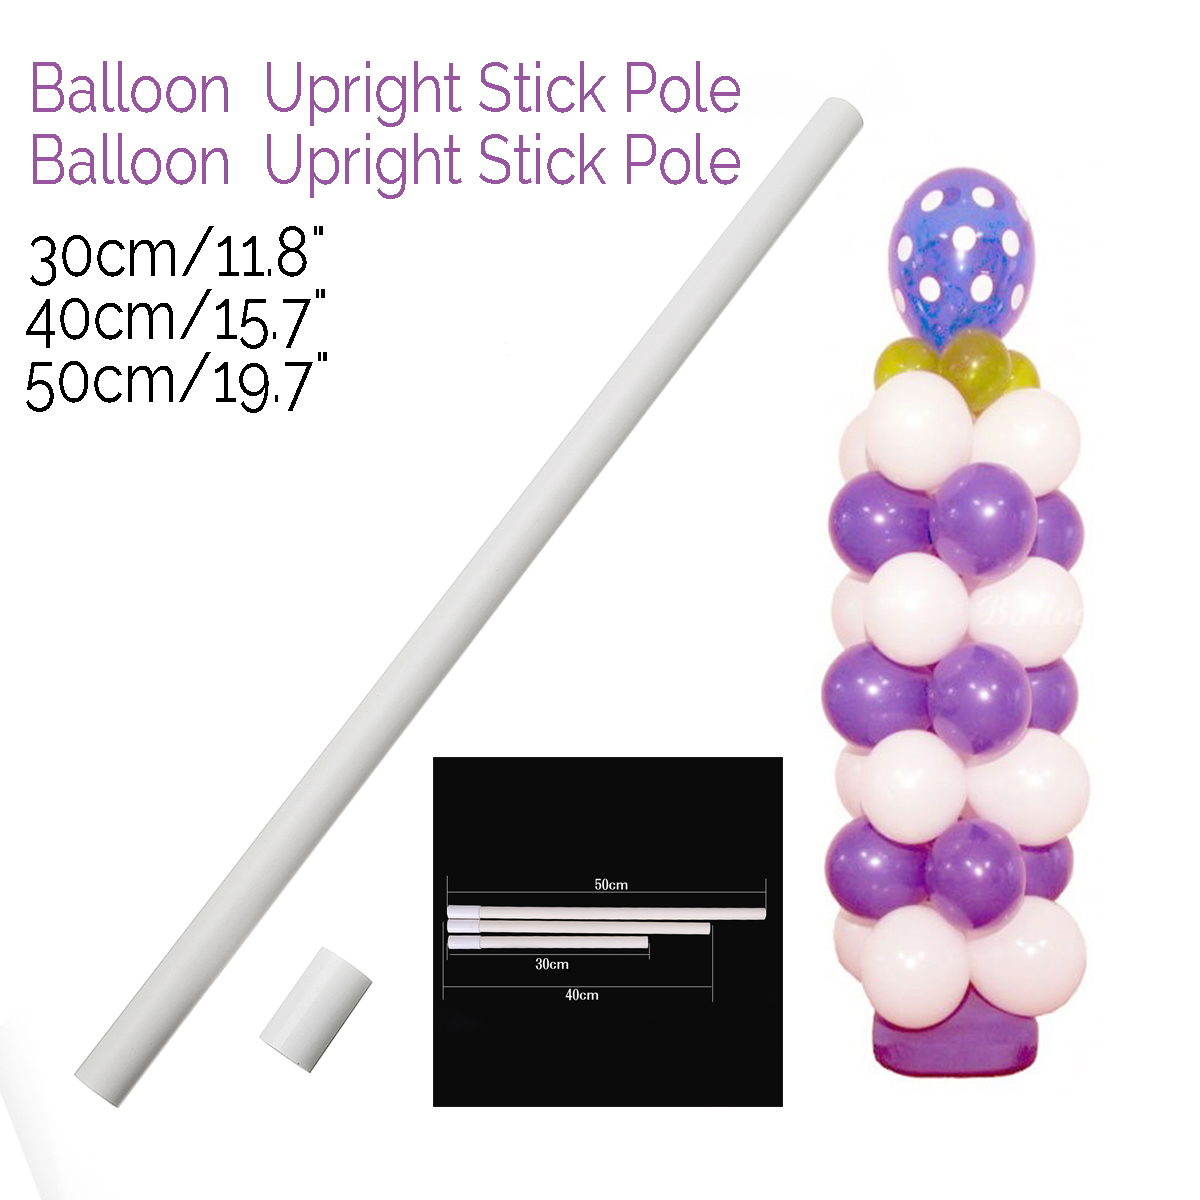 Plastic-Pole-Sticks-for-Arch-Column-Balloons-Base-Stand-Wedding-Party-Decorations-1558232-2